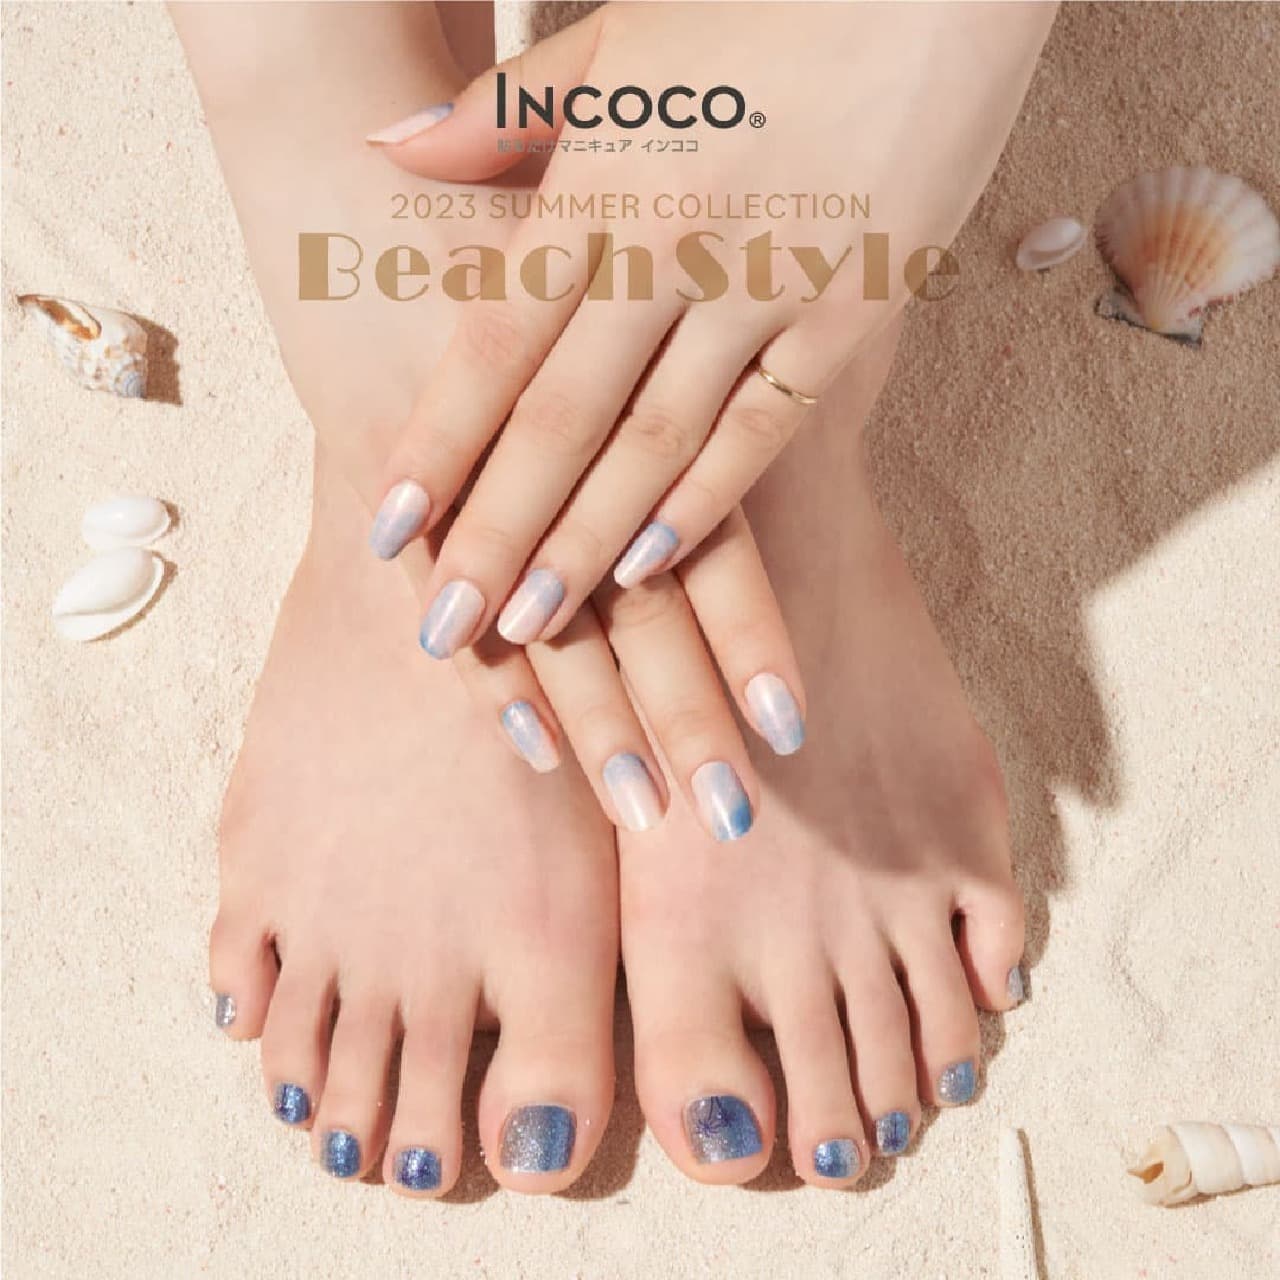 New "incoco" collection "Beach Style